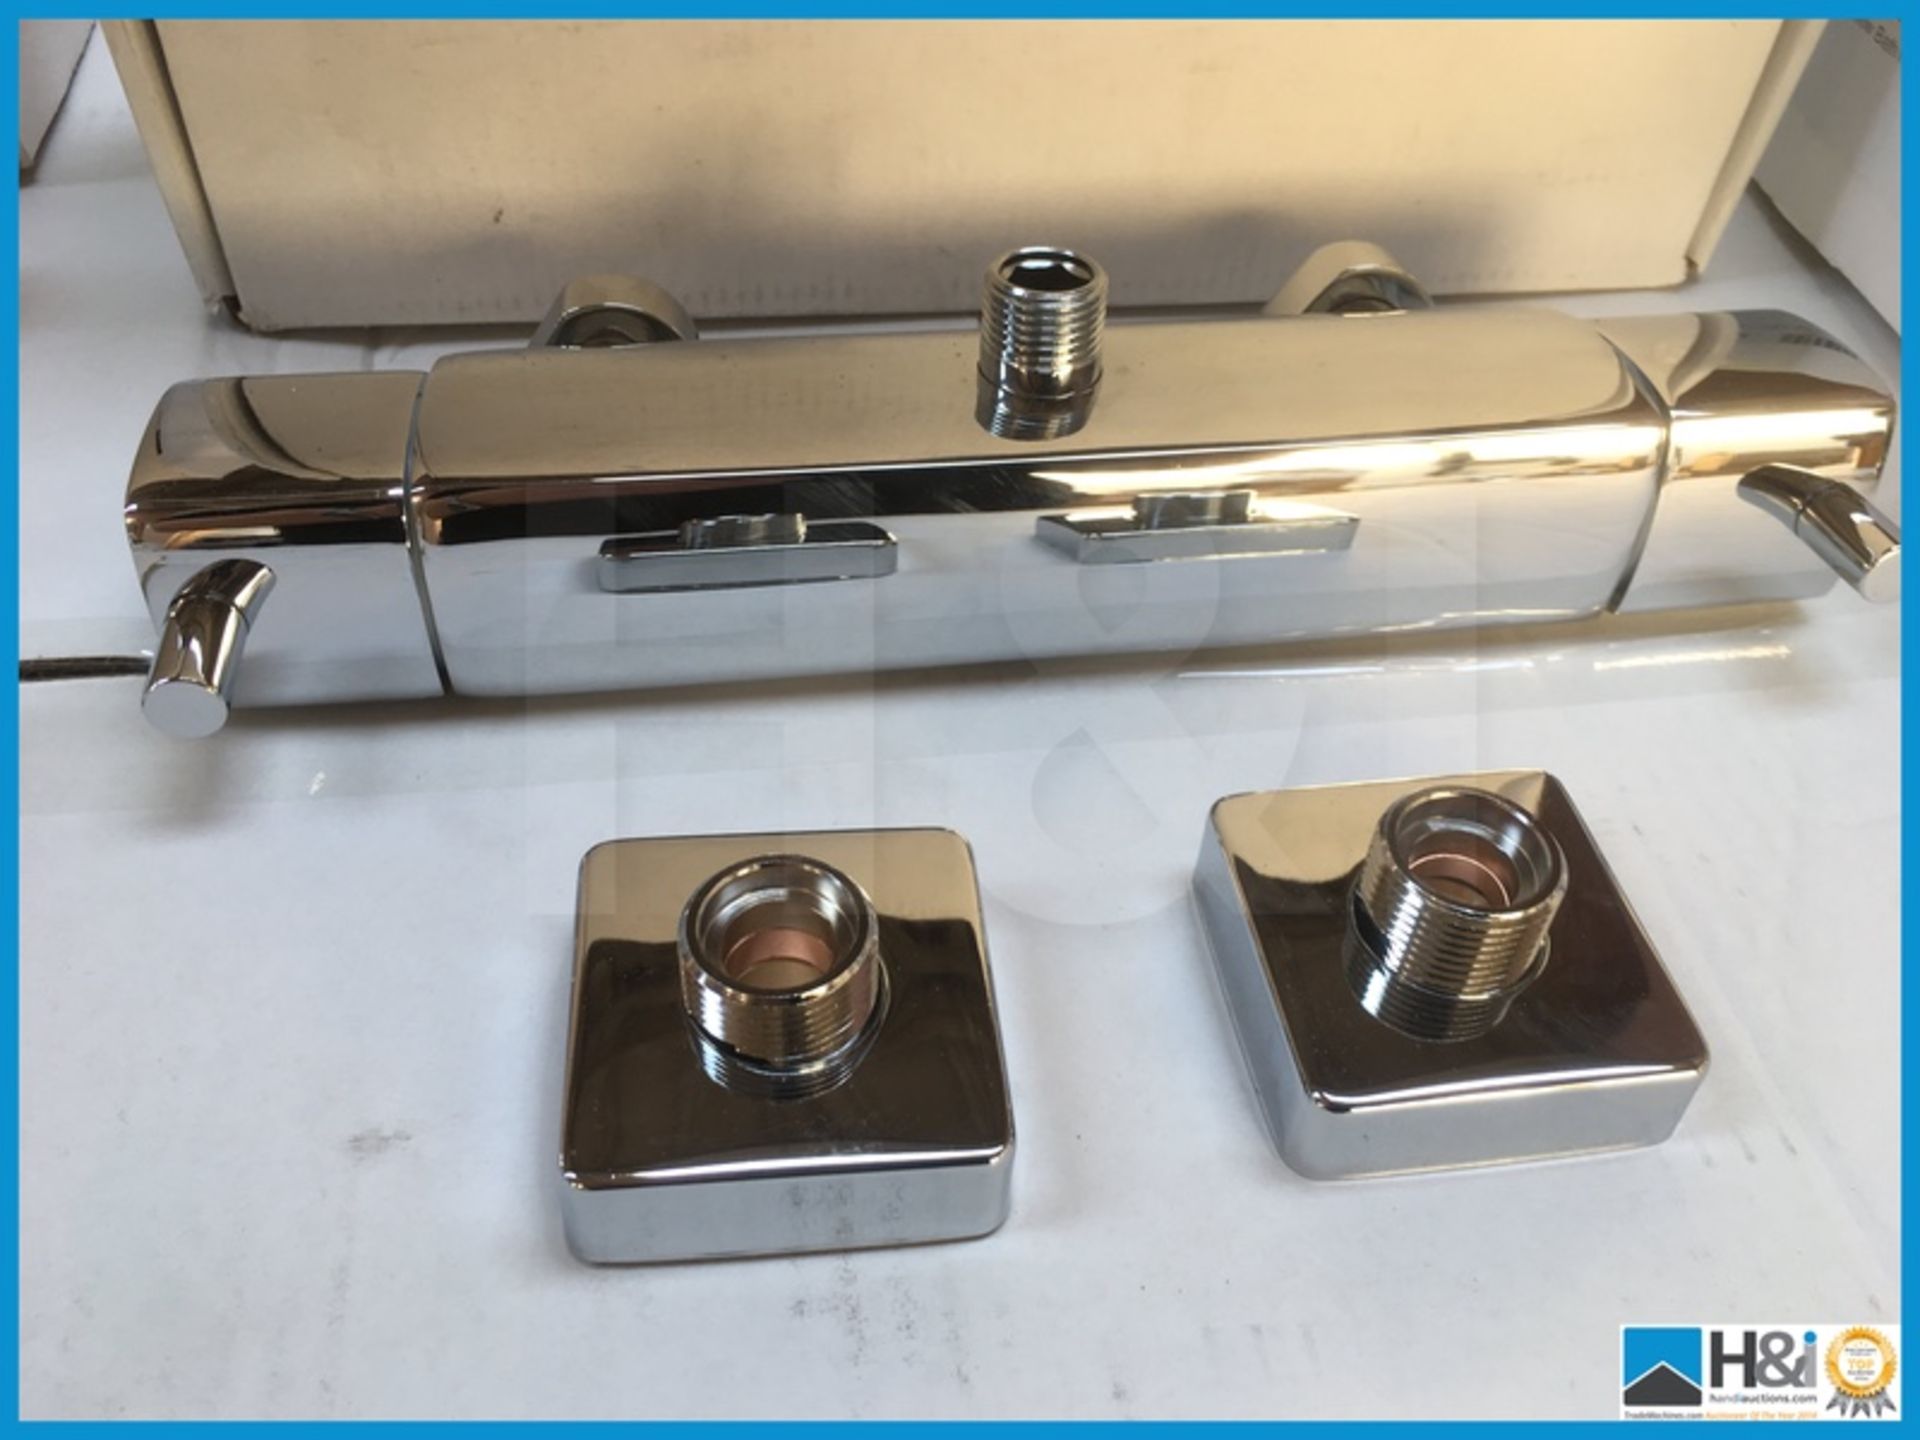 Designer A3502-M quadrillion thermo bar valve in polished chrome finish. New and boxed. Suggested